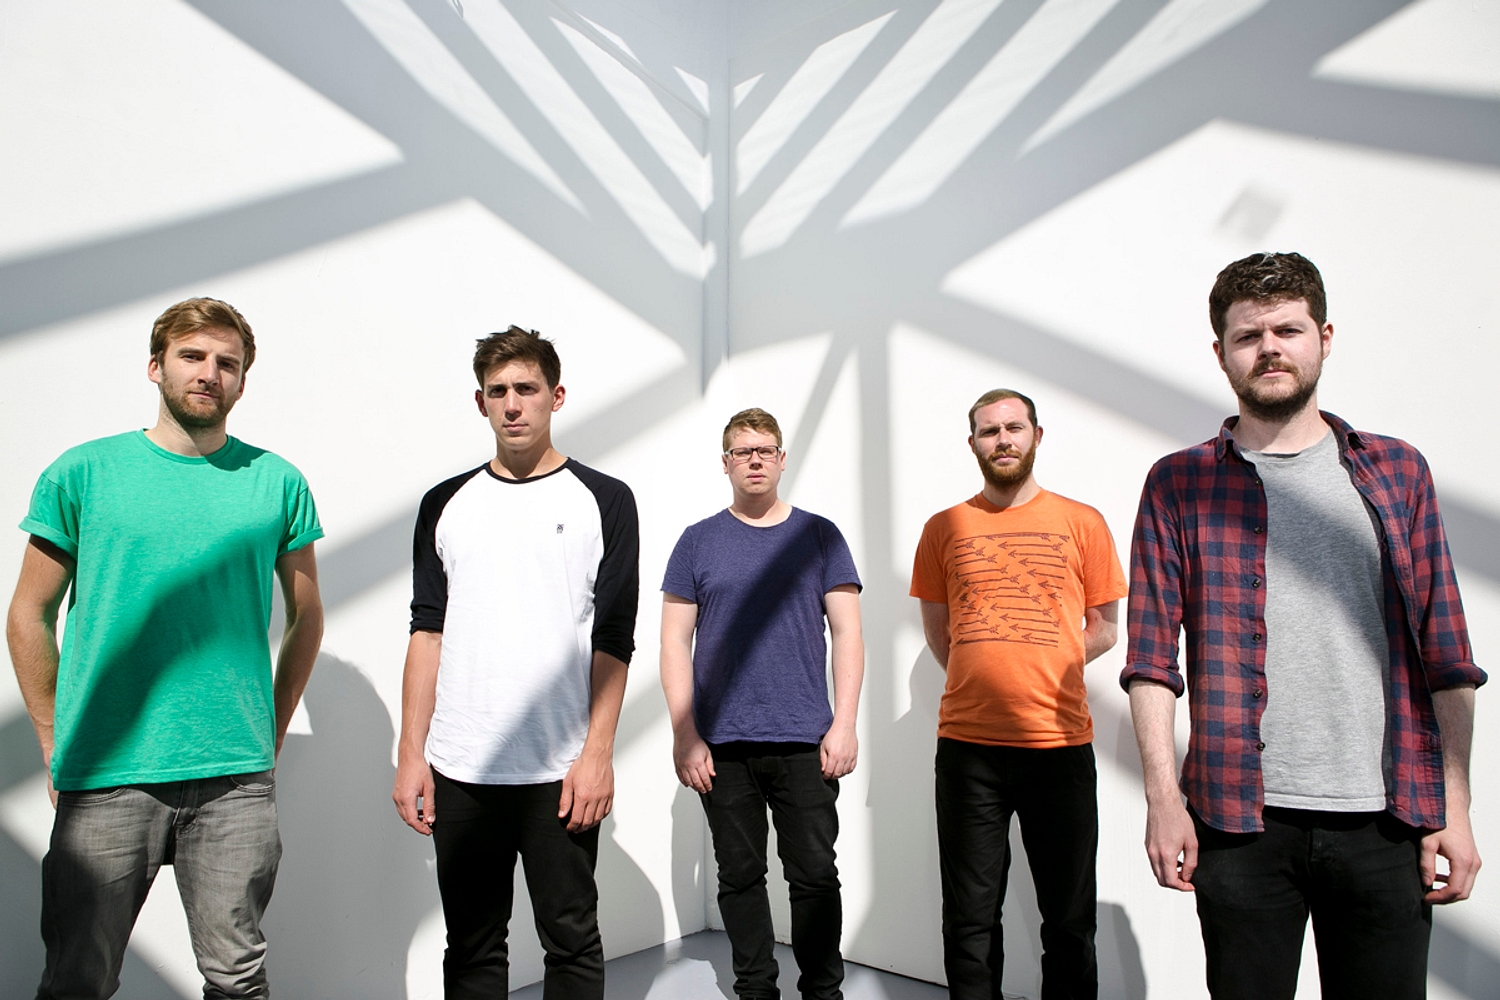 We Were Promised Jetpacks unveil new video for ‘A Part Of It’